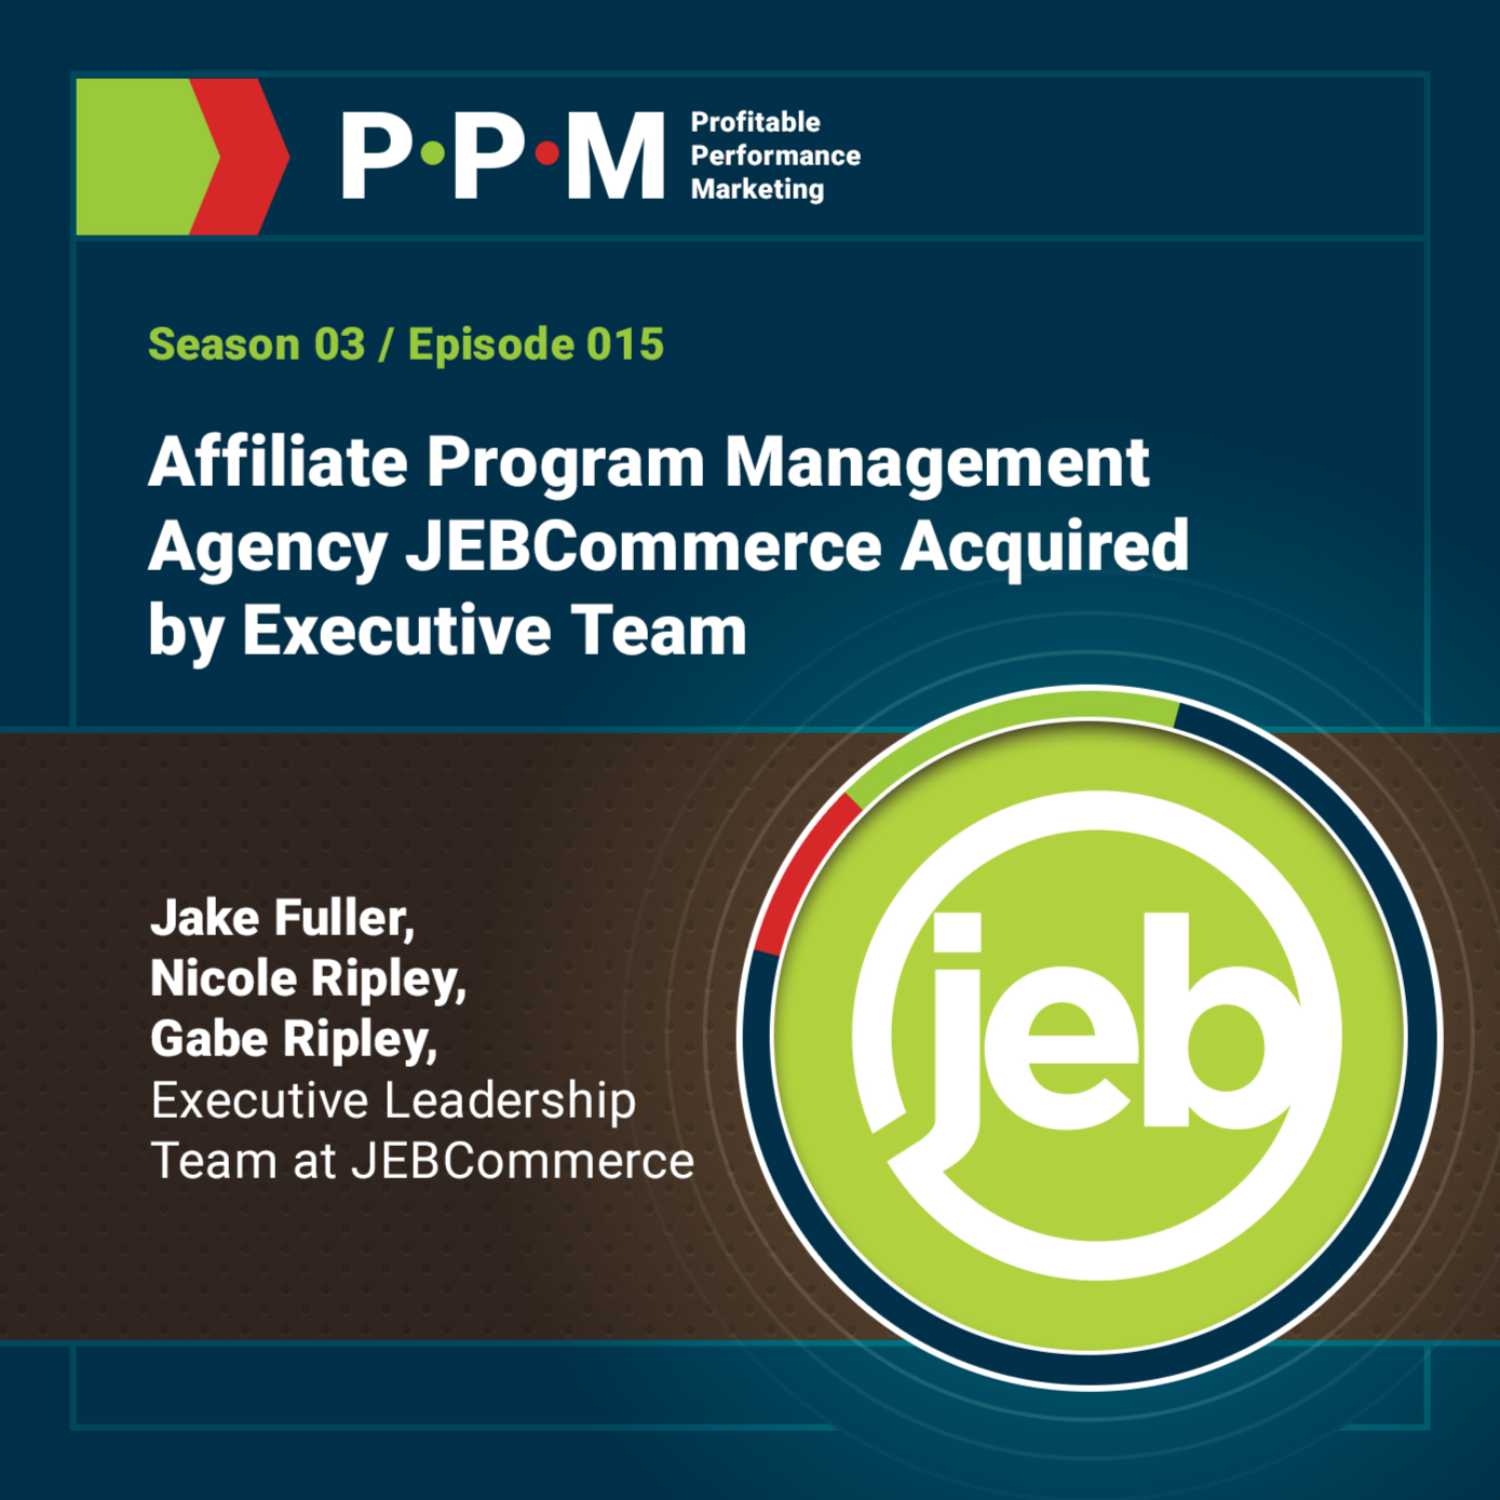 Affiliate Program Management Agency JEBCommerce Acquired by Executive Team